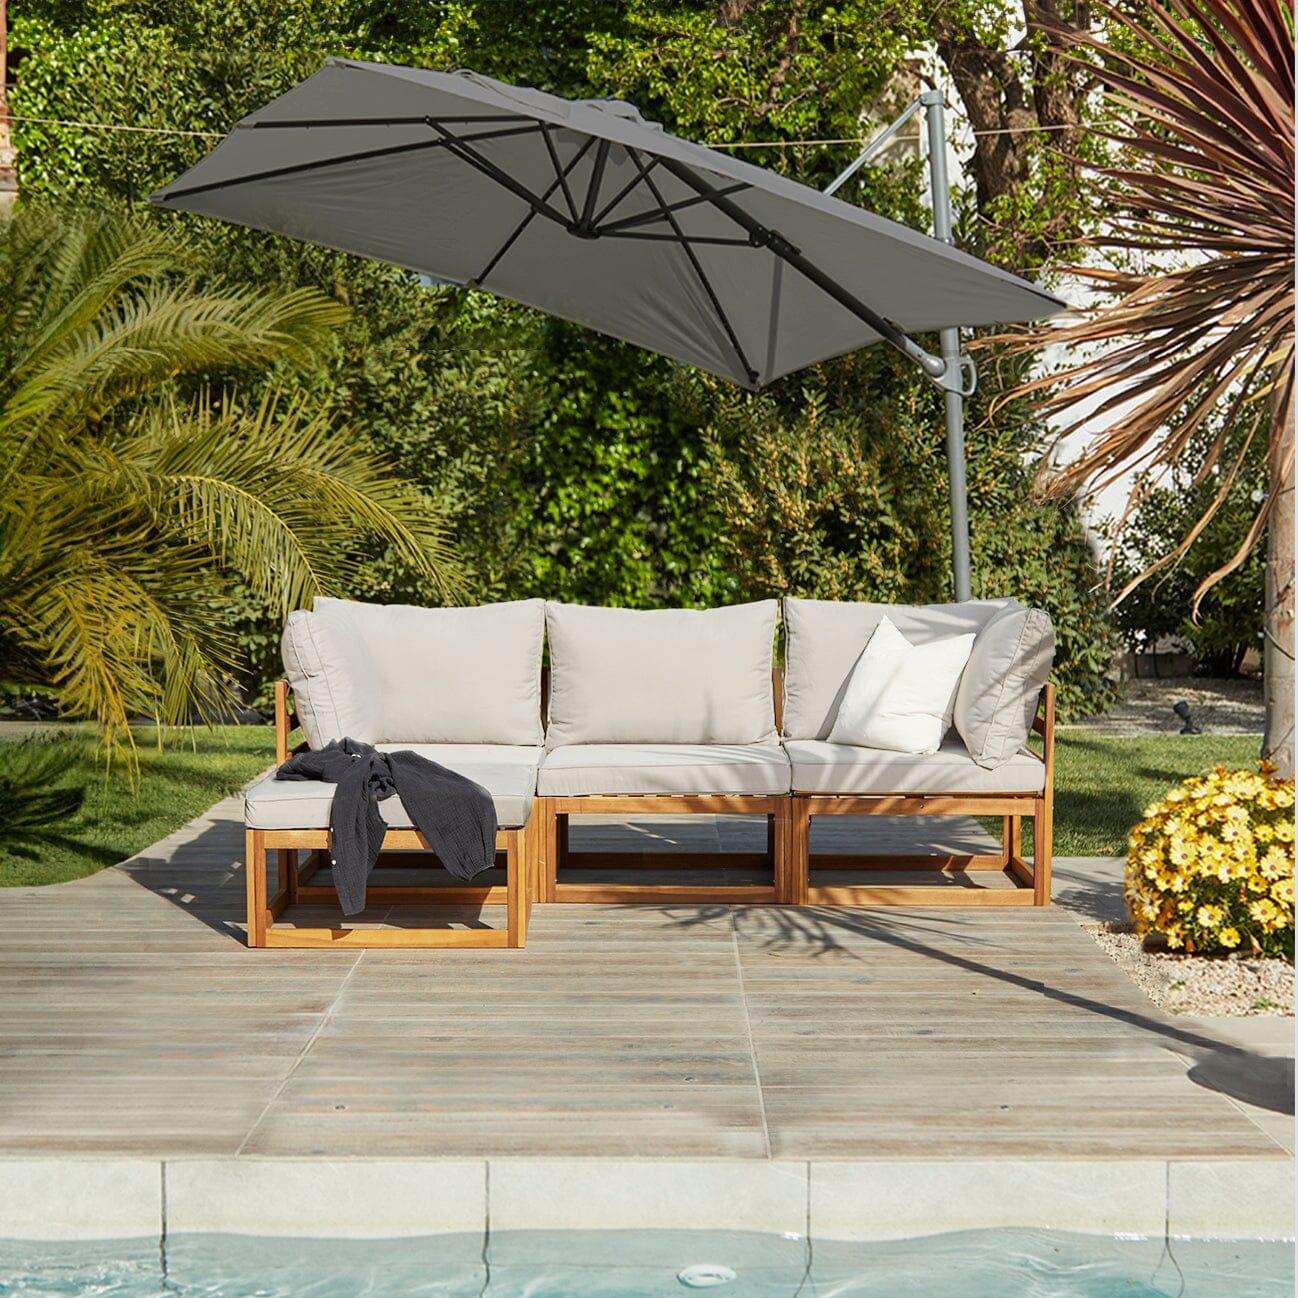 Rowan Natural 3 Seater Garden Sofa and Footstool with Grey Premium Cantilever Parasol